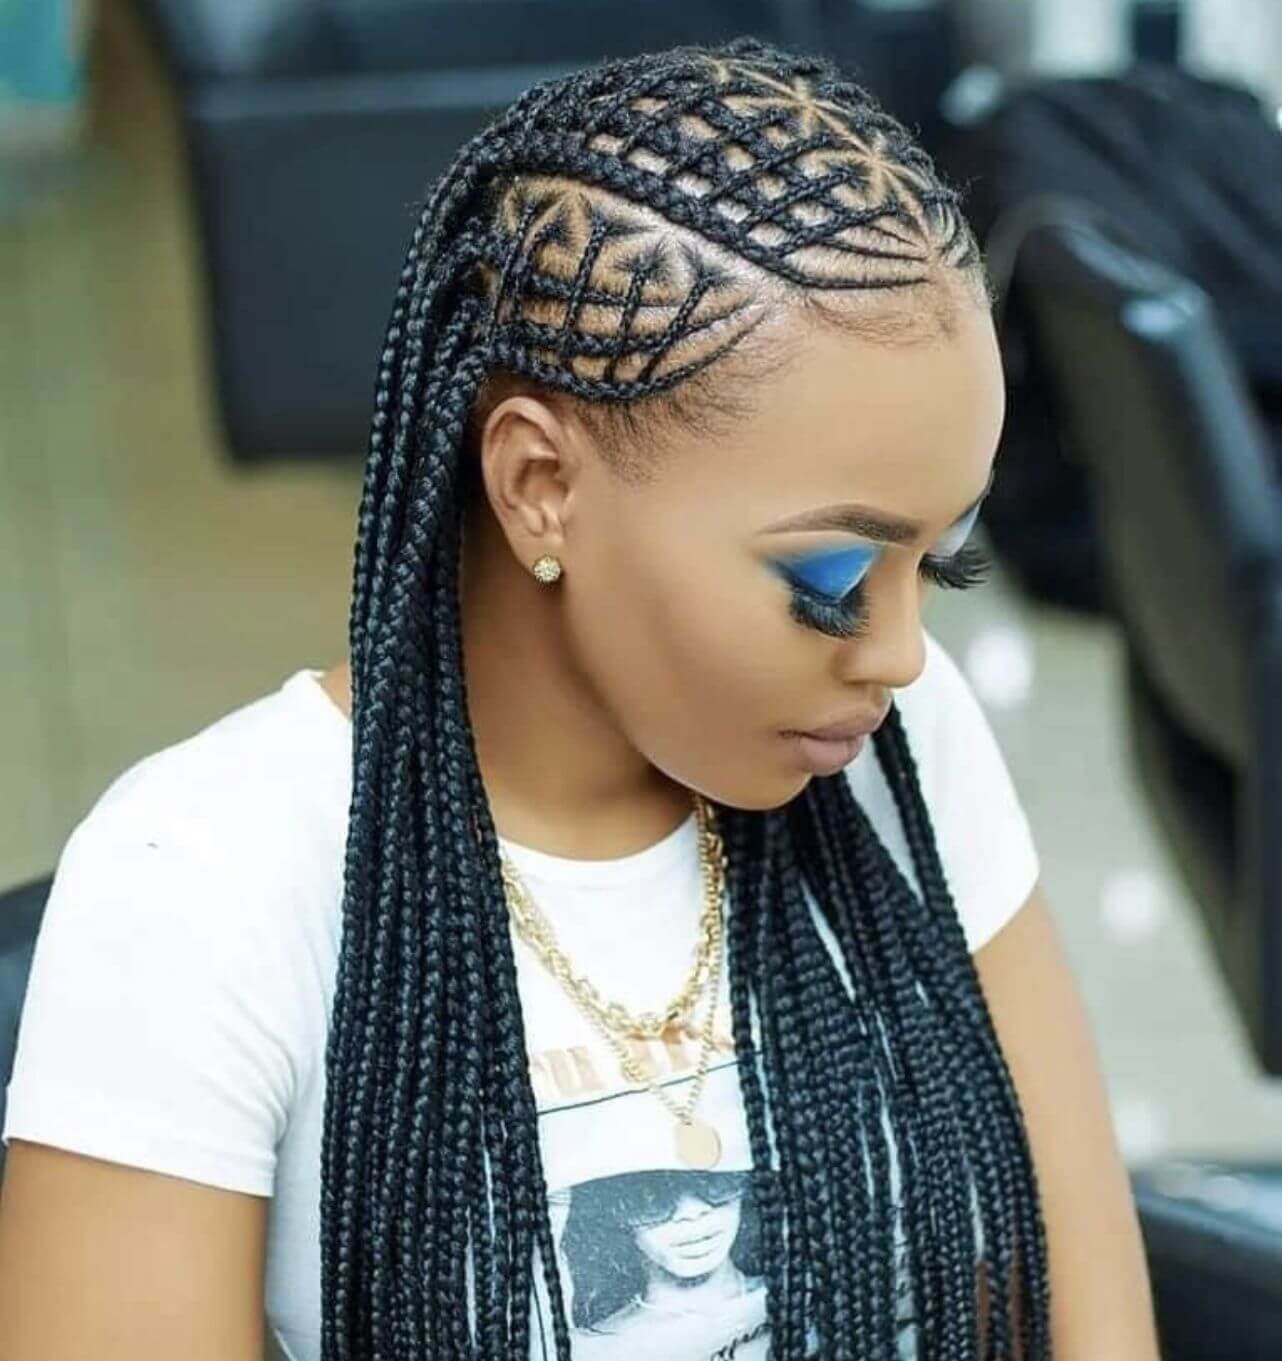 50 Trendy Braided Hairstyles To Instantly Glam Up Your Look - 399